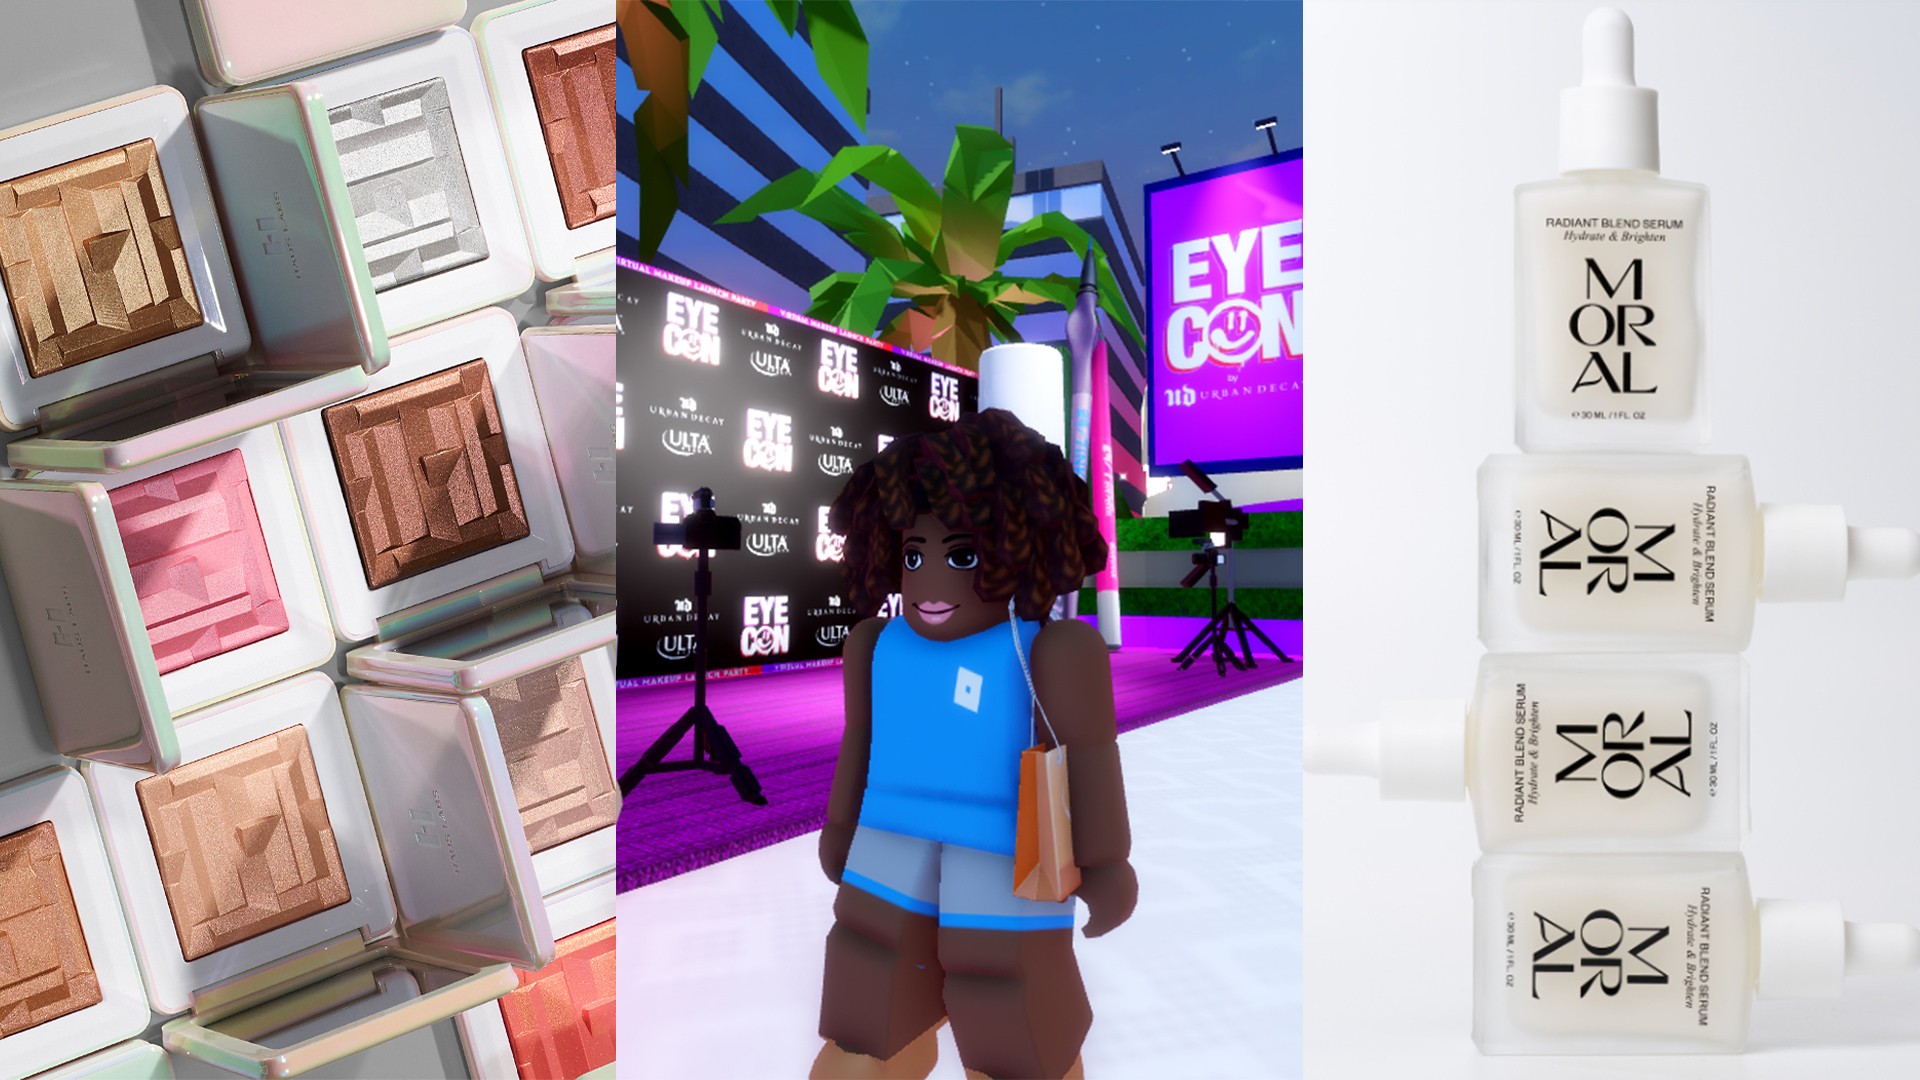 Urban Decay debuts Metaverse makeovers with Roblox 